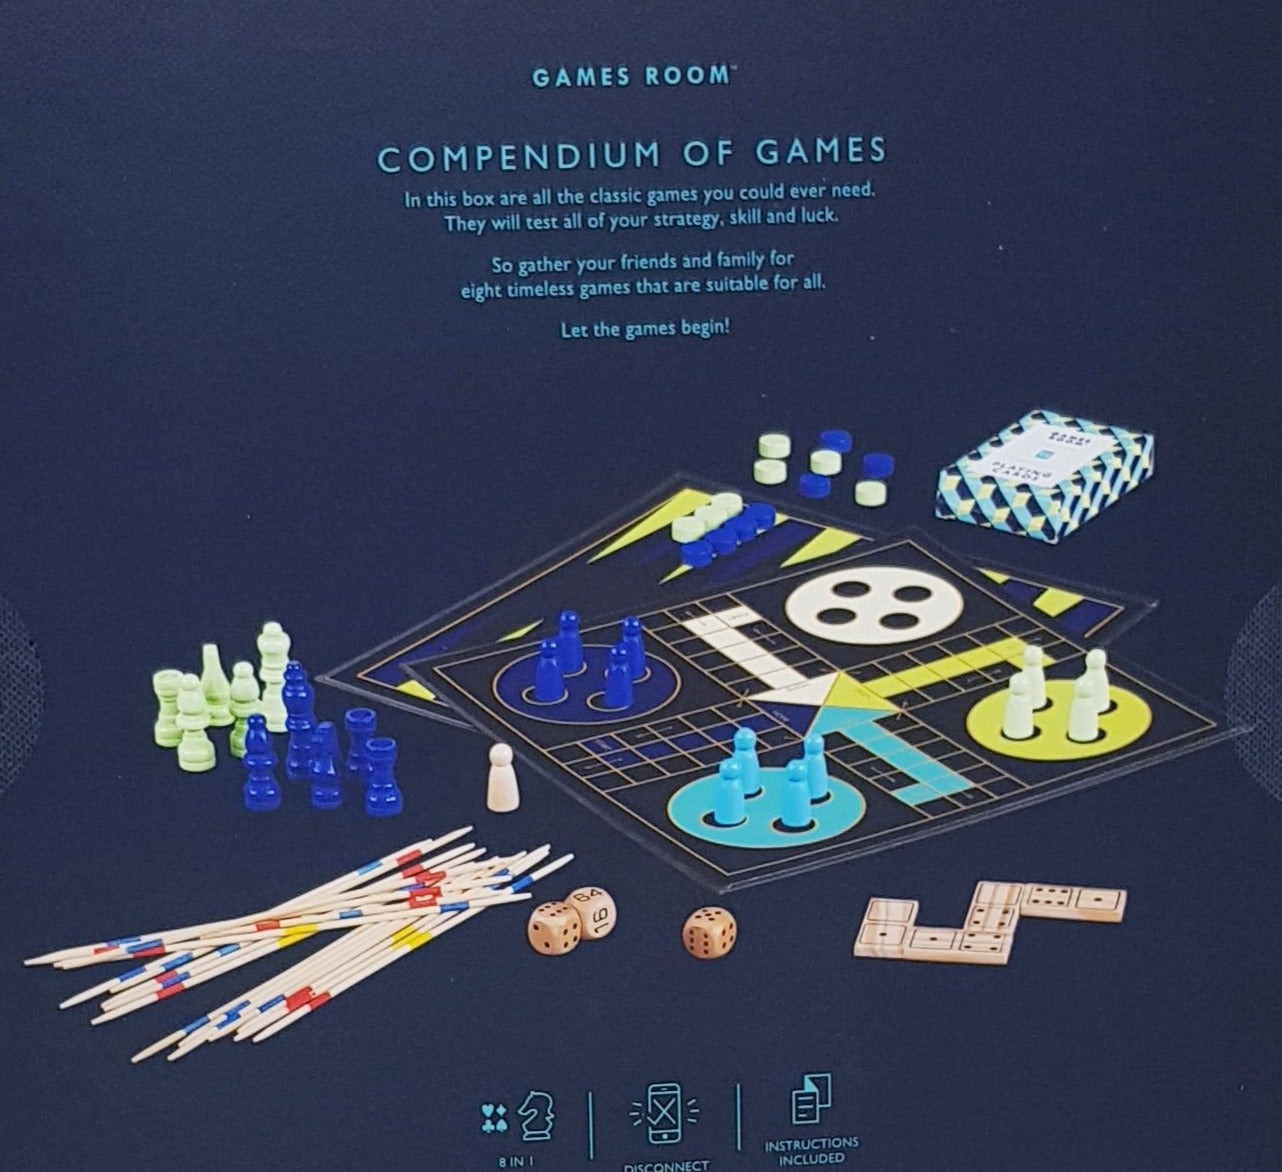 Board Games - Games Room - Eight In One Games Compendium